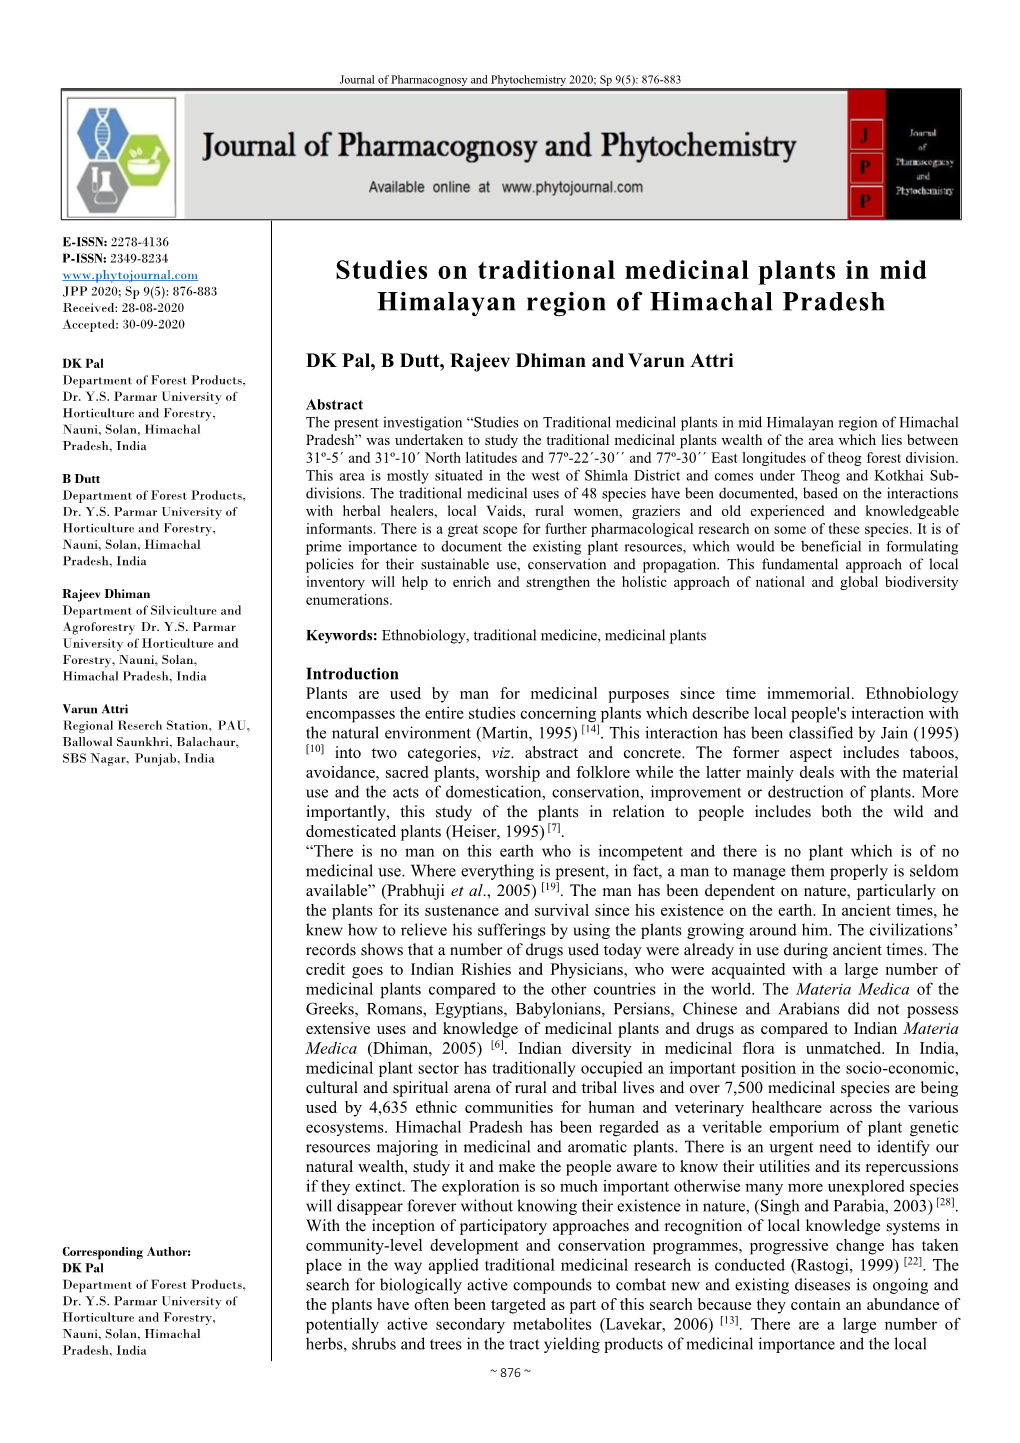 Studies on Traditional Medicinal Plants in Mid Himalayan Region Of